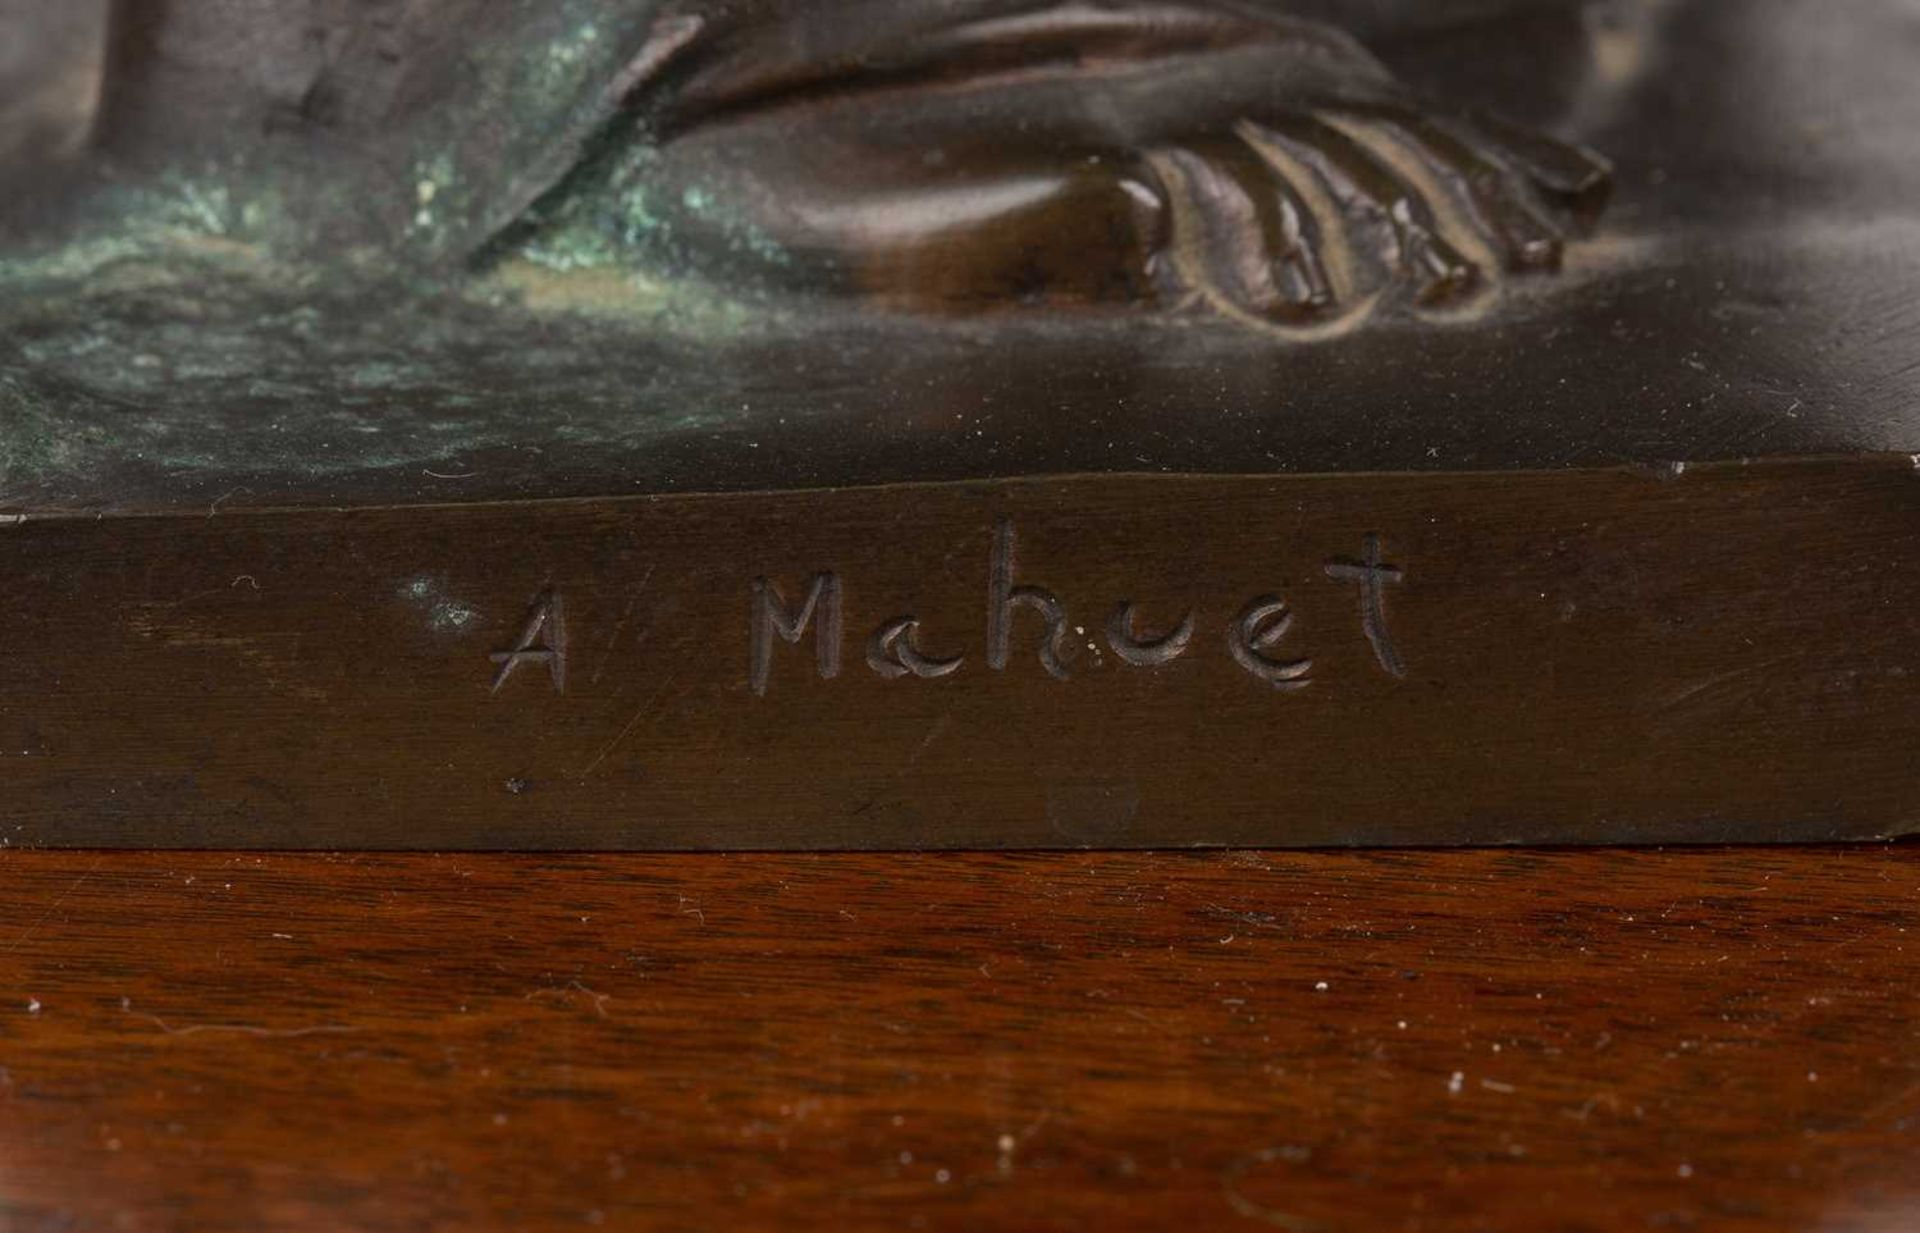 After A. Mahuet (Late 19th/early 20th Century) After the Antique 'Venus De Milo" bronze sculpture, - Image 3 of 3